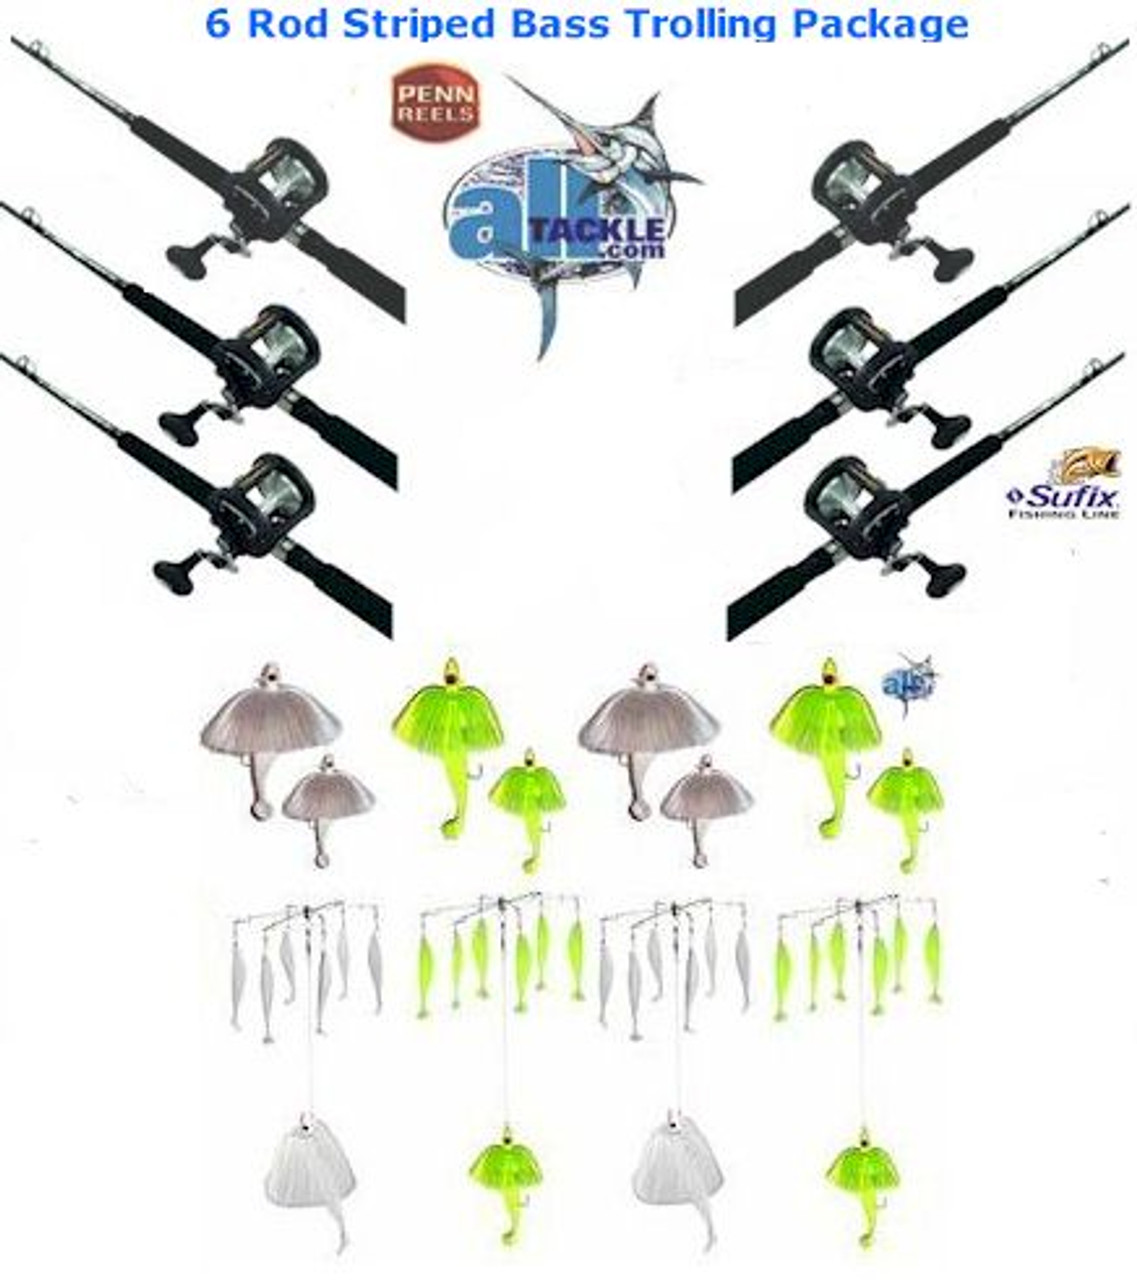 Striped Bass 6 Rod & Trolling Rig Package